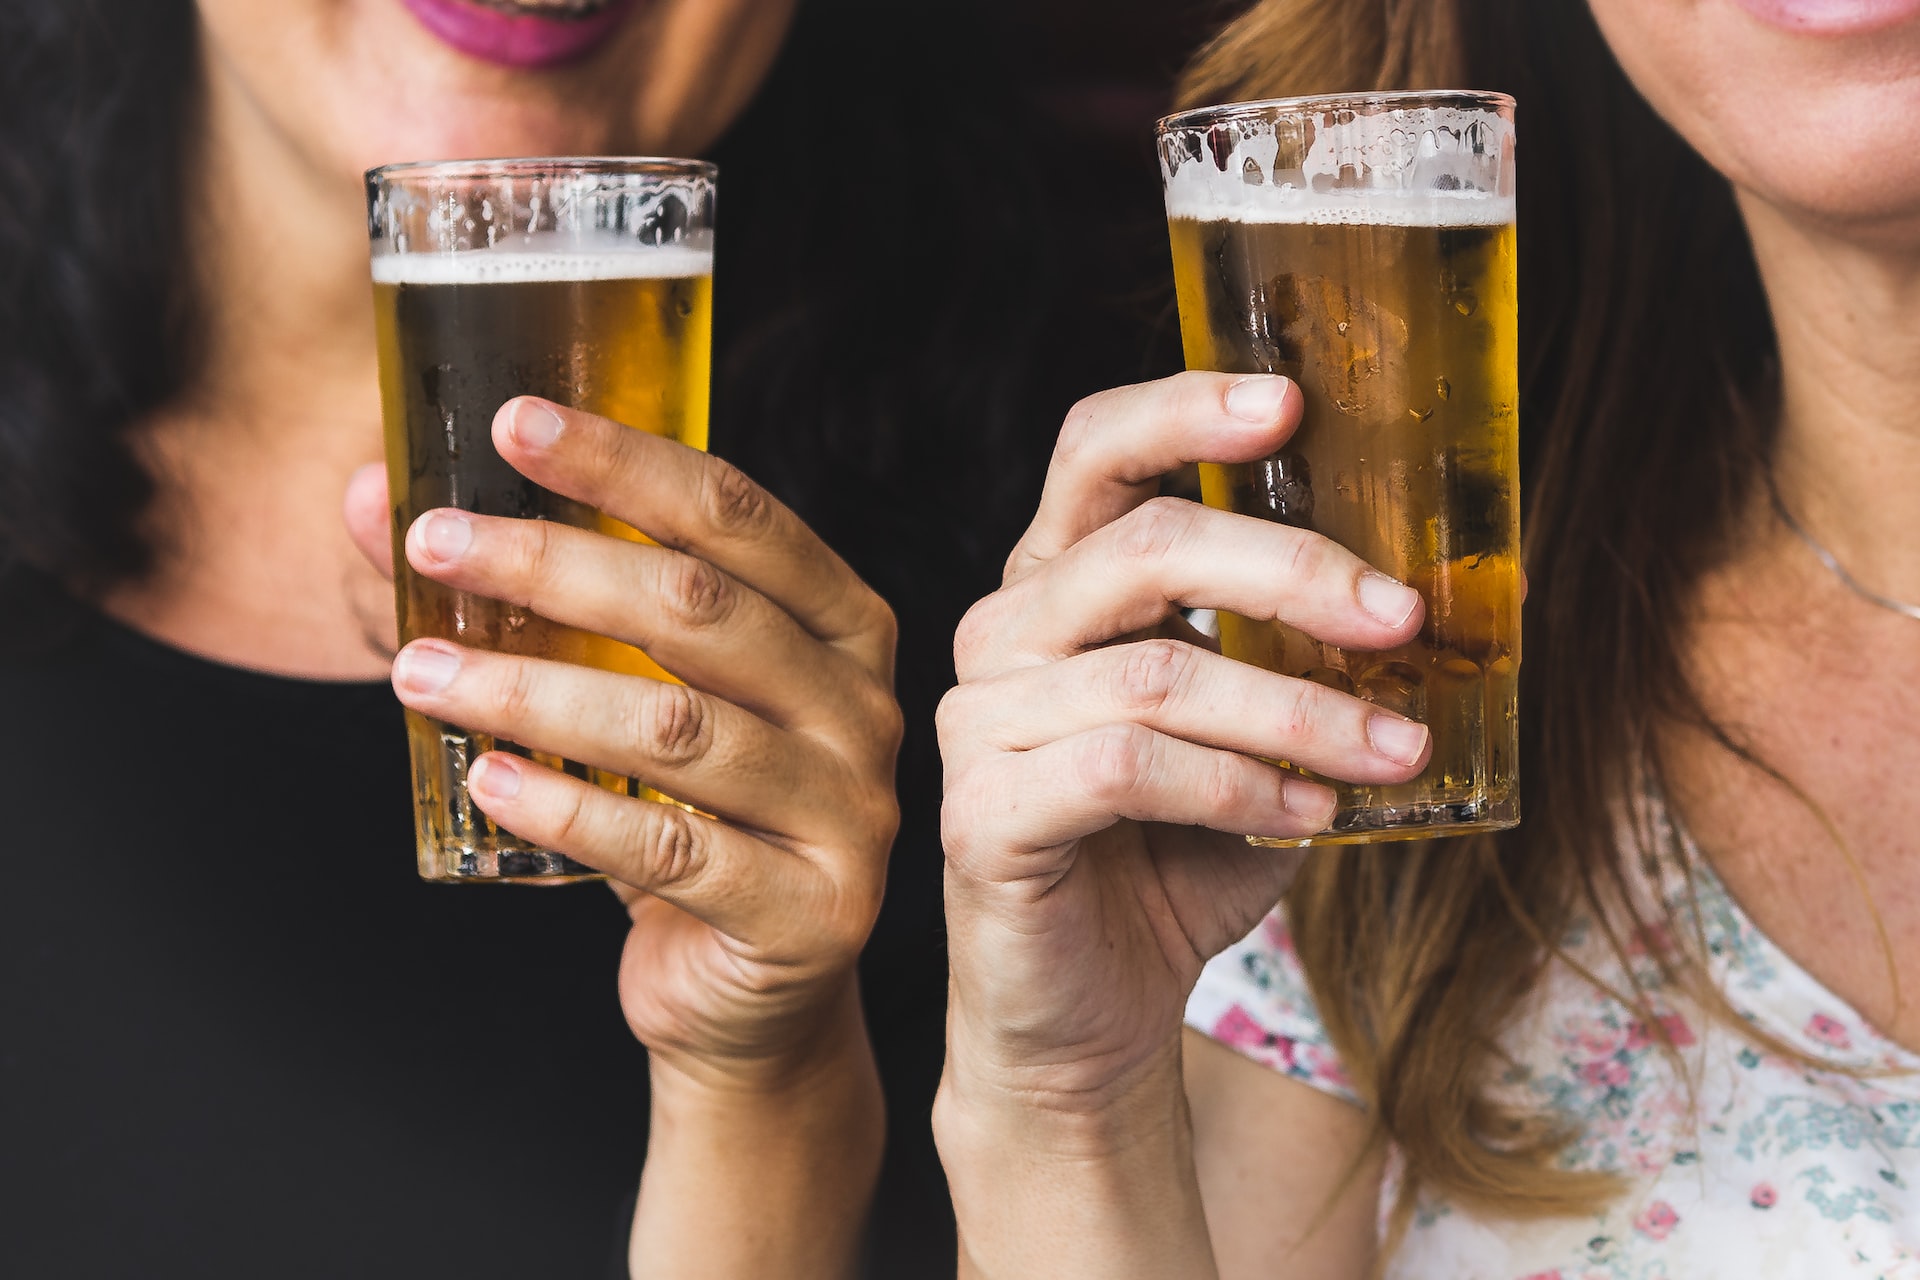 Woman holding glasses filled with beer